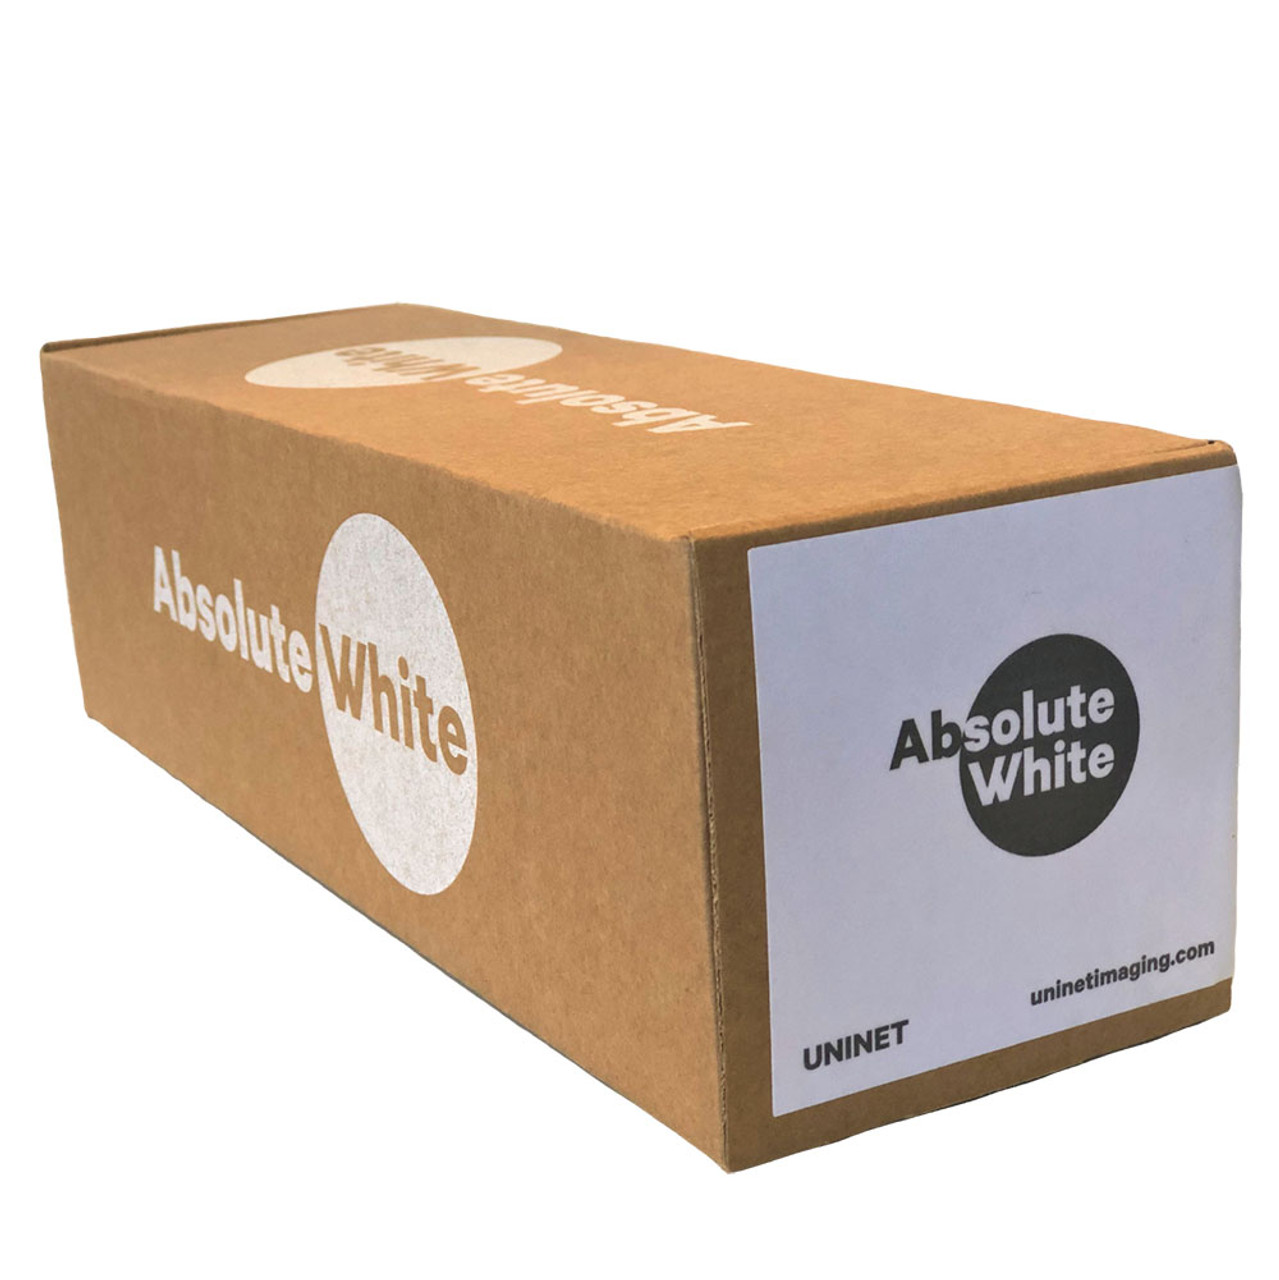 Absolute White Remanufactured Toner Cartridge for use in Color Laserjet Pro M252N - Alternative to CF400A -